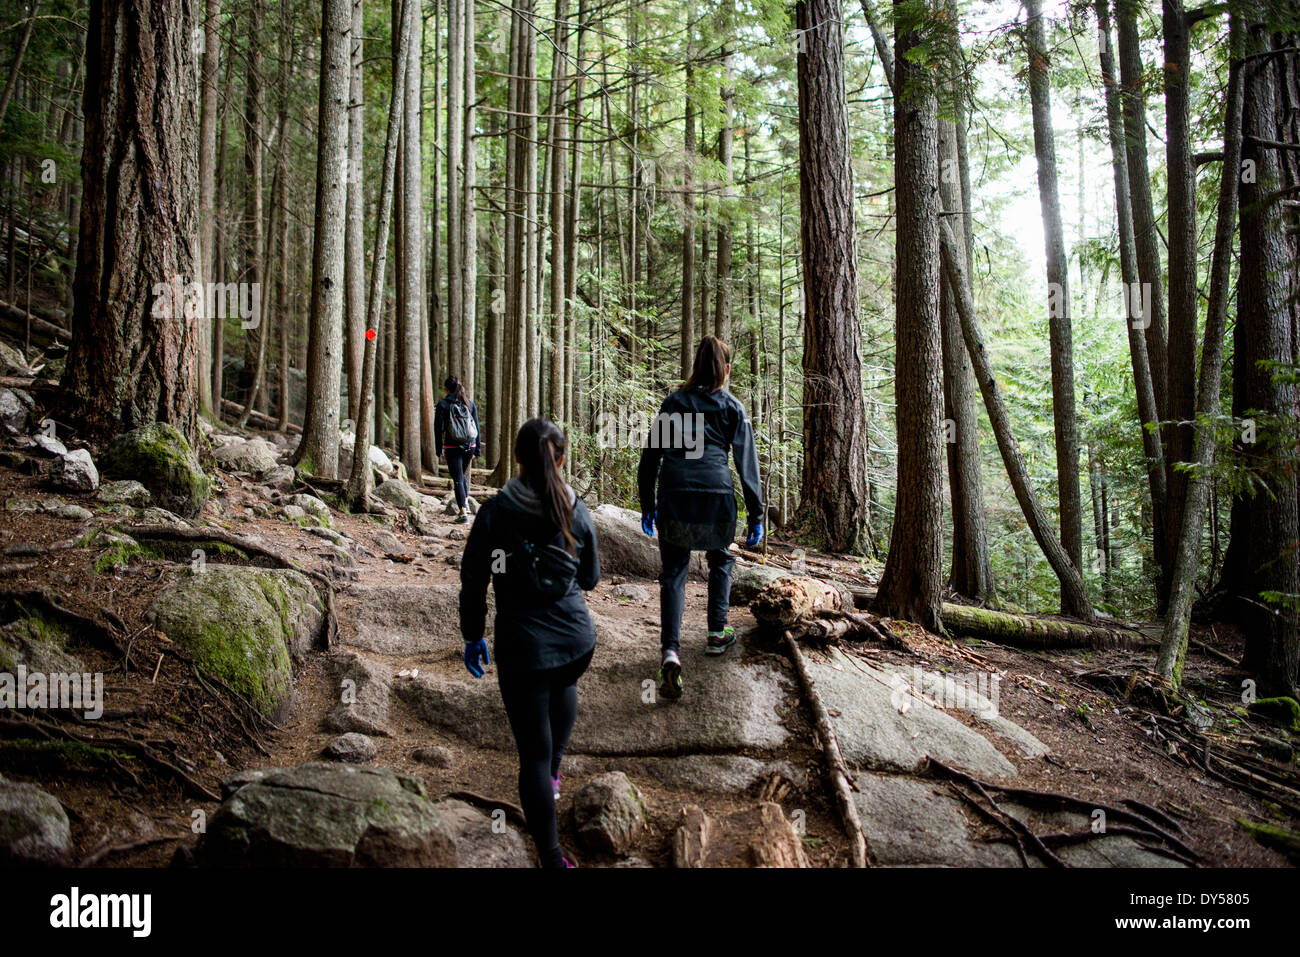 Three young female hikers in forest, Squamish, British Columbia, Canada Stock Photo